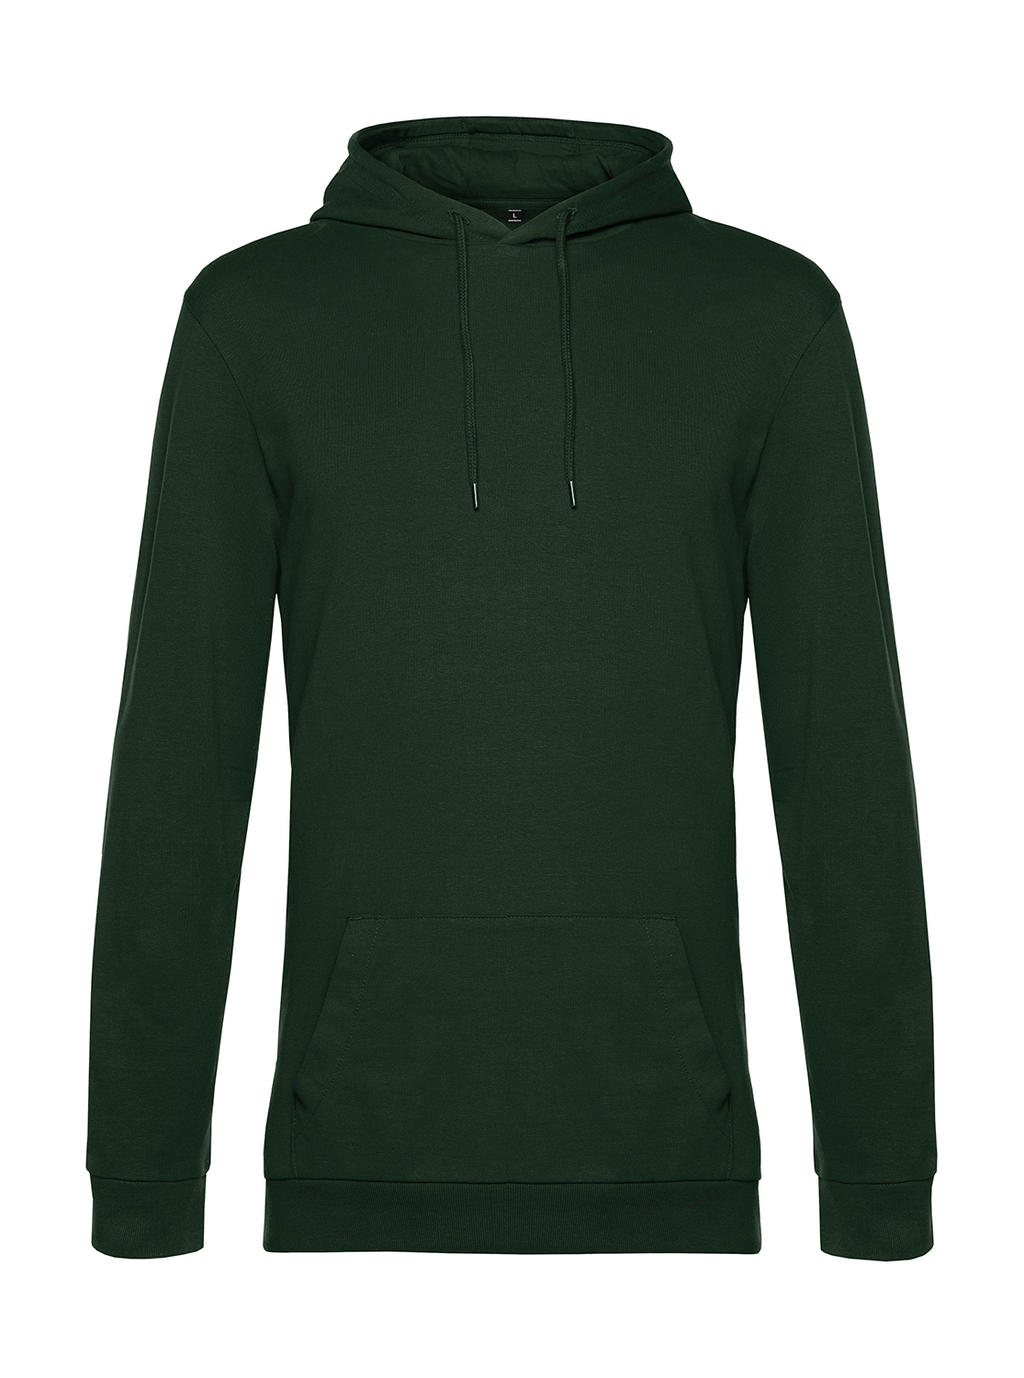 Mikina s kapucňou #Hoodie French Terry - forest green